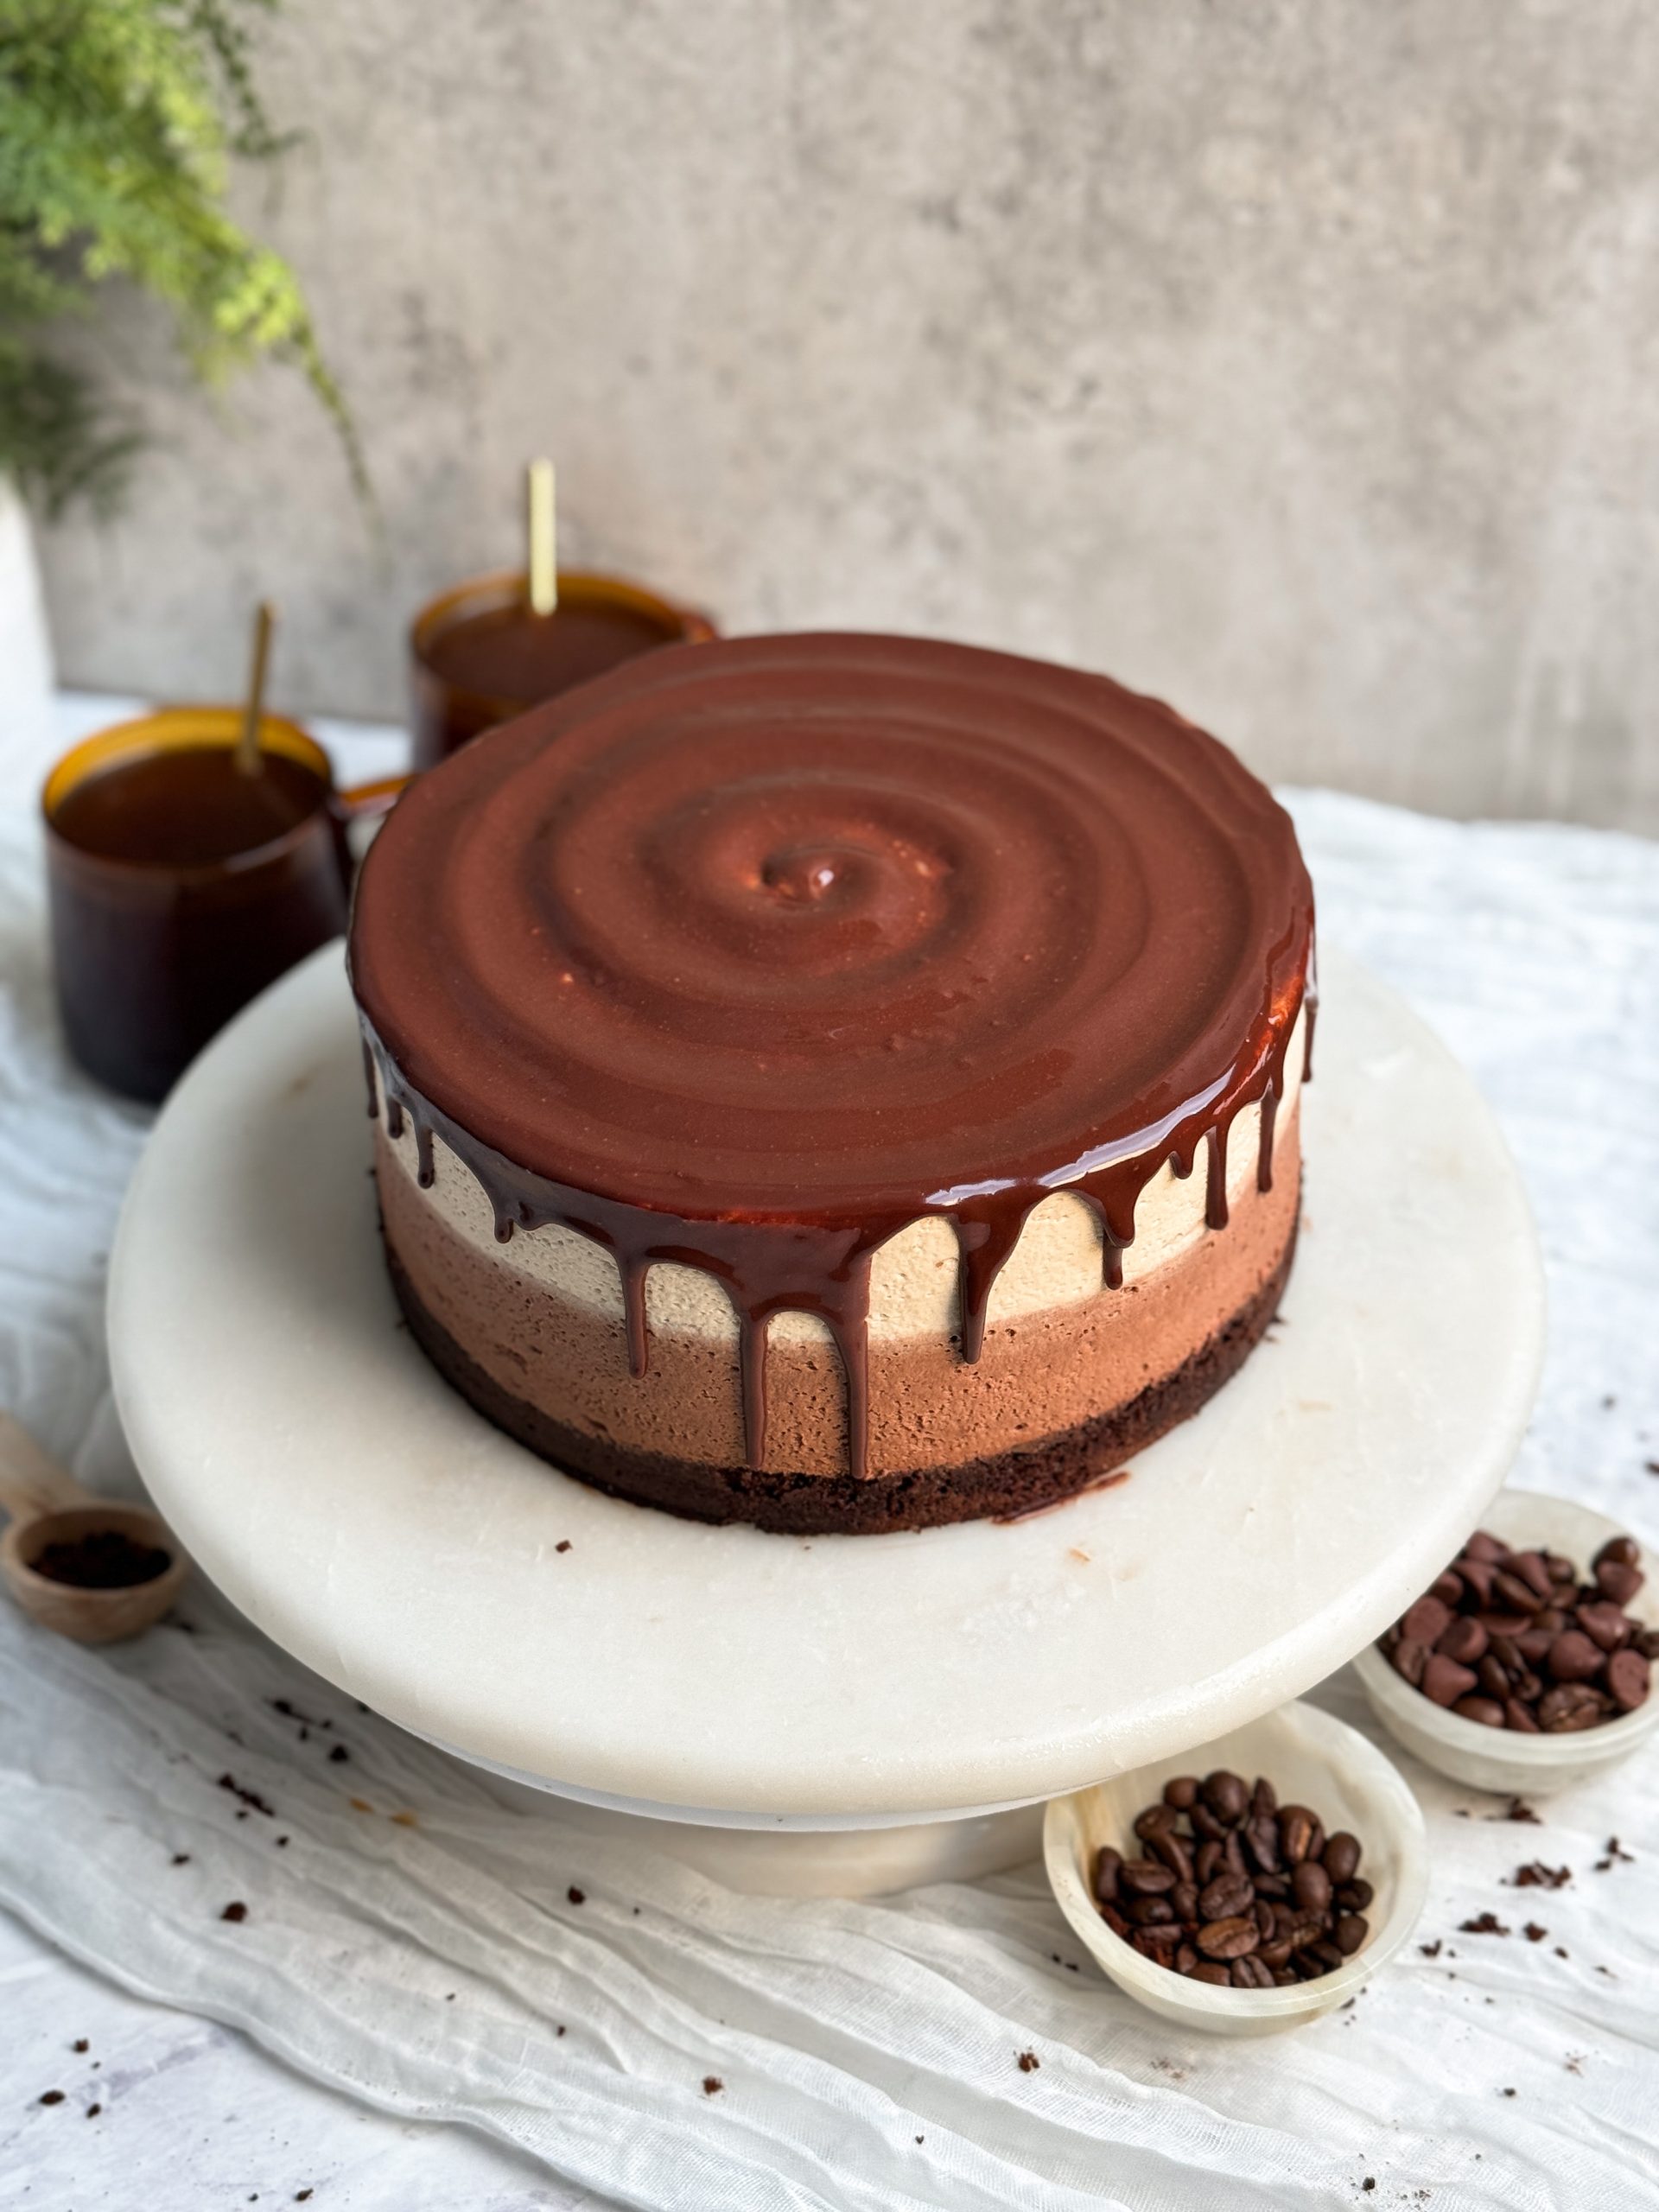 a layered mocha mousse cake on a marble cake stand. the cake has a layer of chocolate cake, a layer of chocolate mousse, a layer of white chocolate mocha mousse, and is topped off with a shiny chocolate glaze dripping on the sides